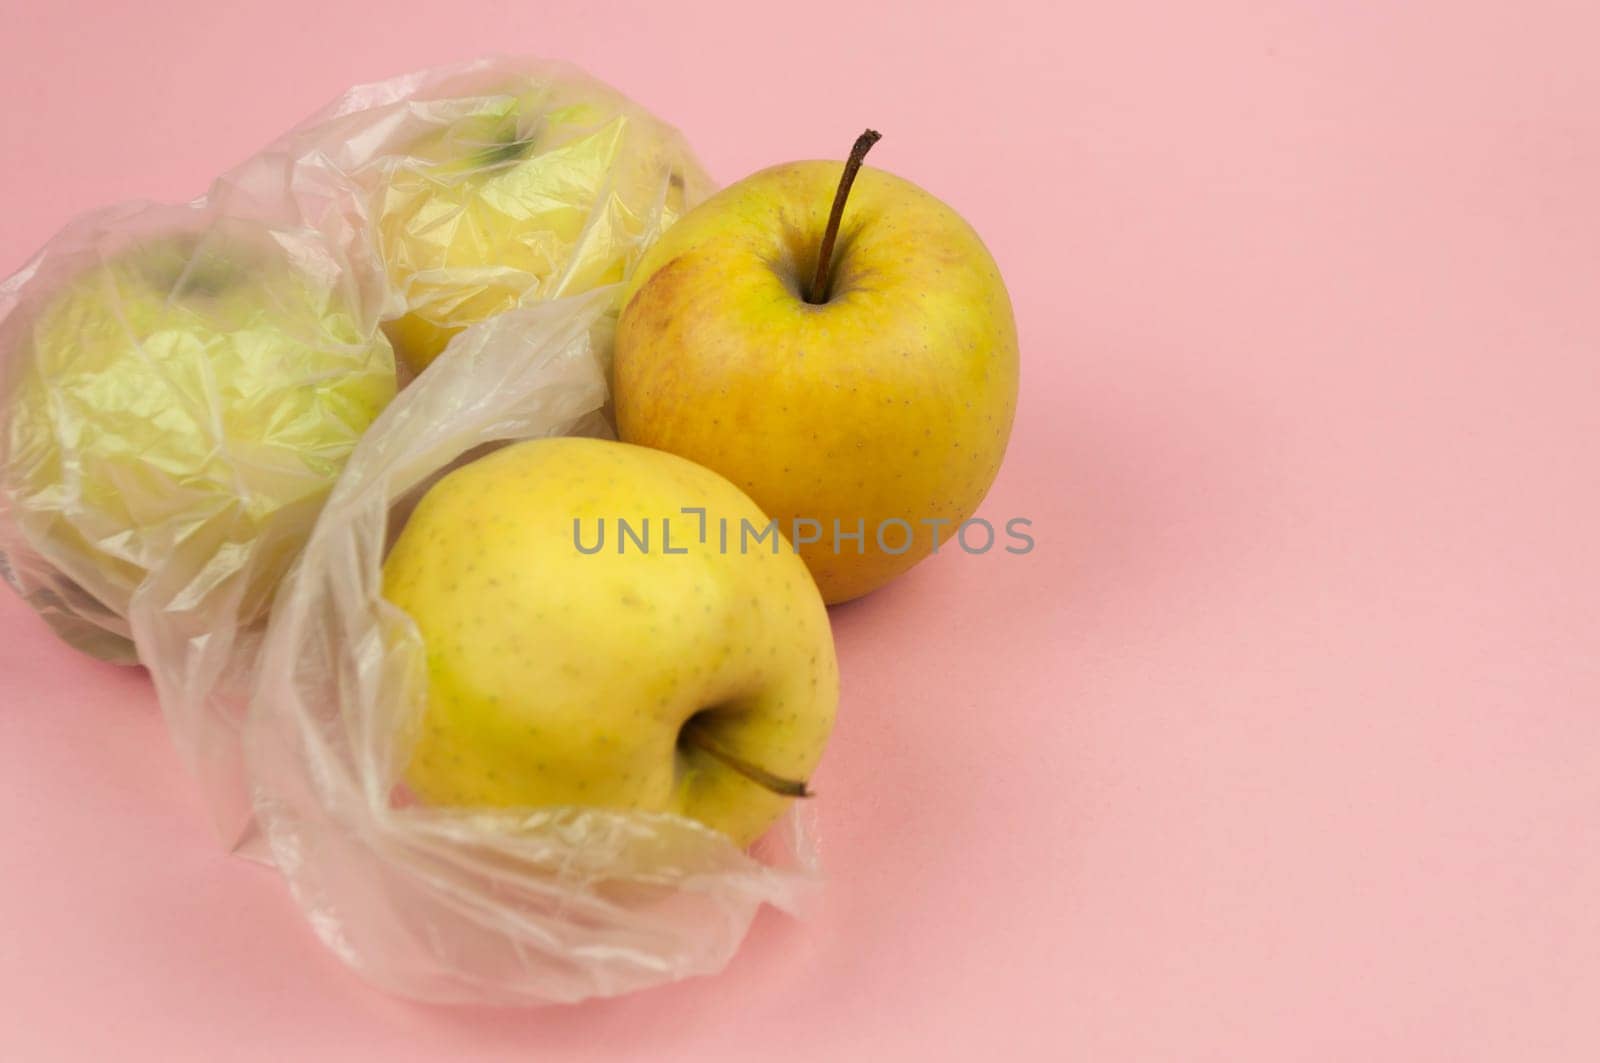 A bag of apples is sitting on a pink background. The apples are in plastic bags and are yellow in color